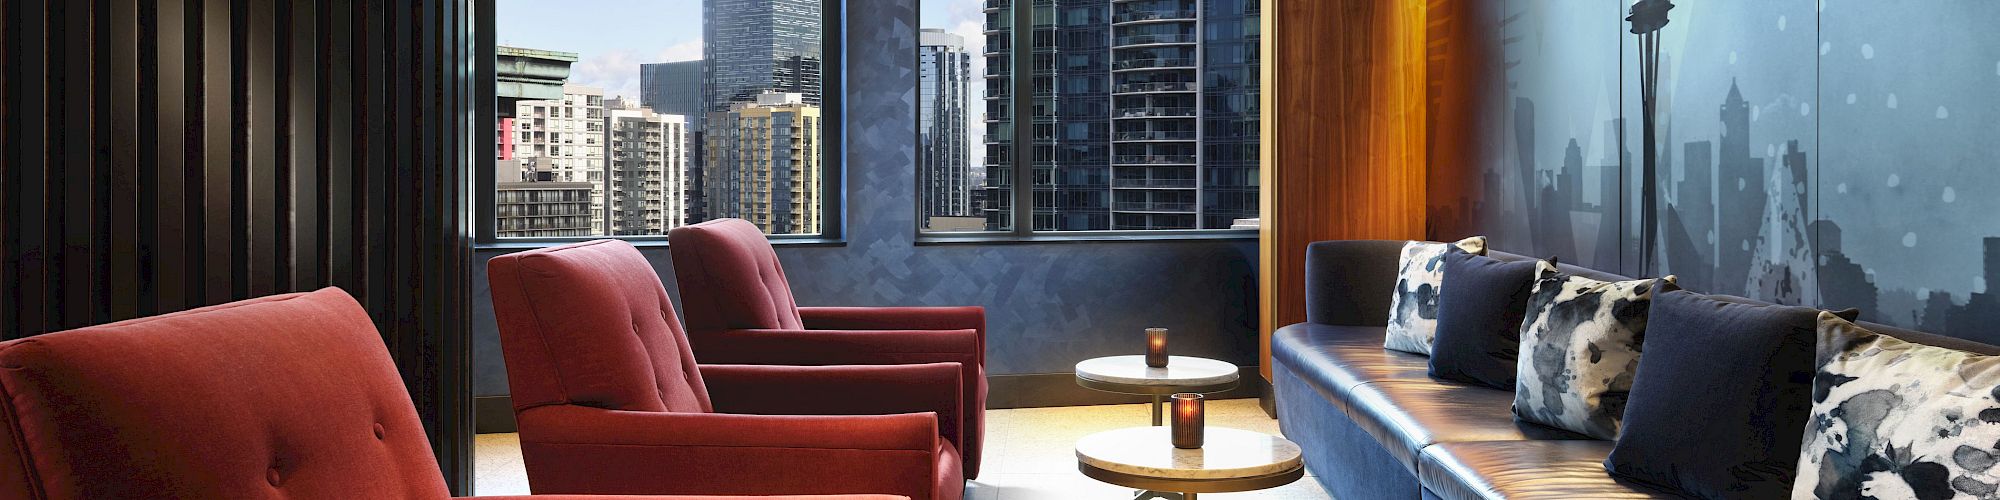 A modern lounge area with red chairs, sleek tables, and a long bench with pillows against a wall featuring a cityscape mural. Ends the sentence.